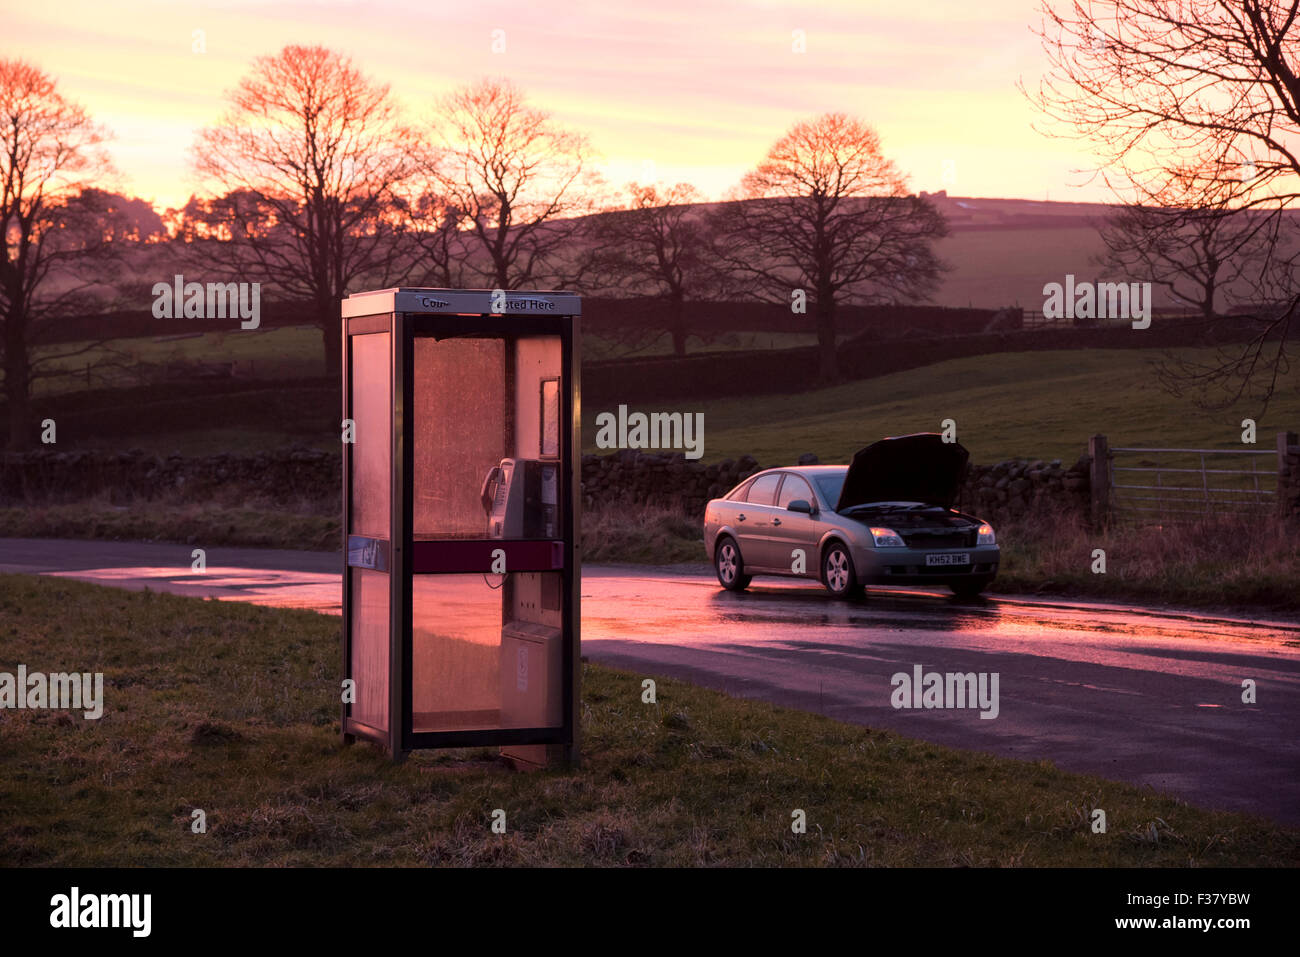 A car, bonnet raised after breaking down, parked at sunset in a deserted countryside lane (lay-by) alongside a public telephone box - England, UK. Stock Photo